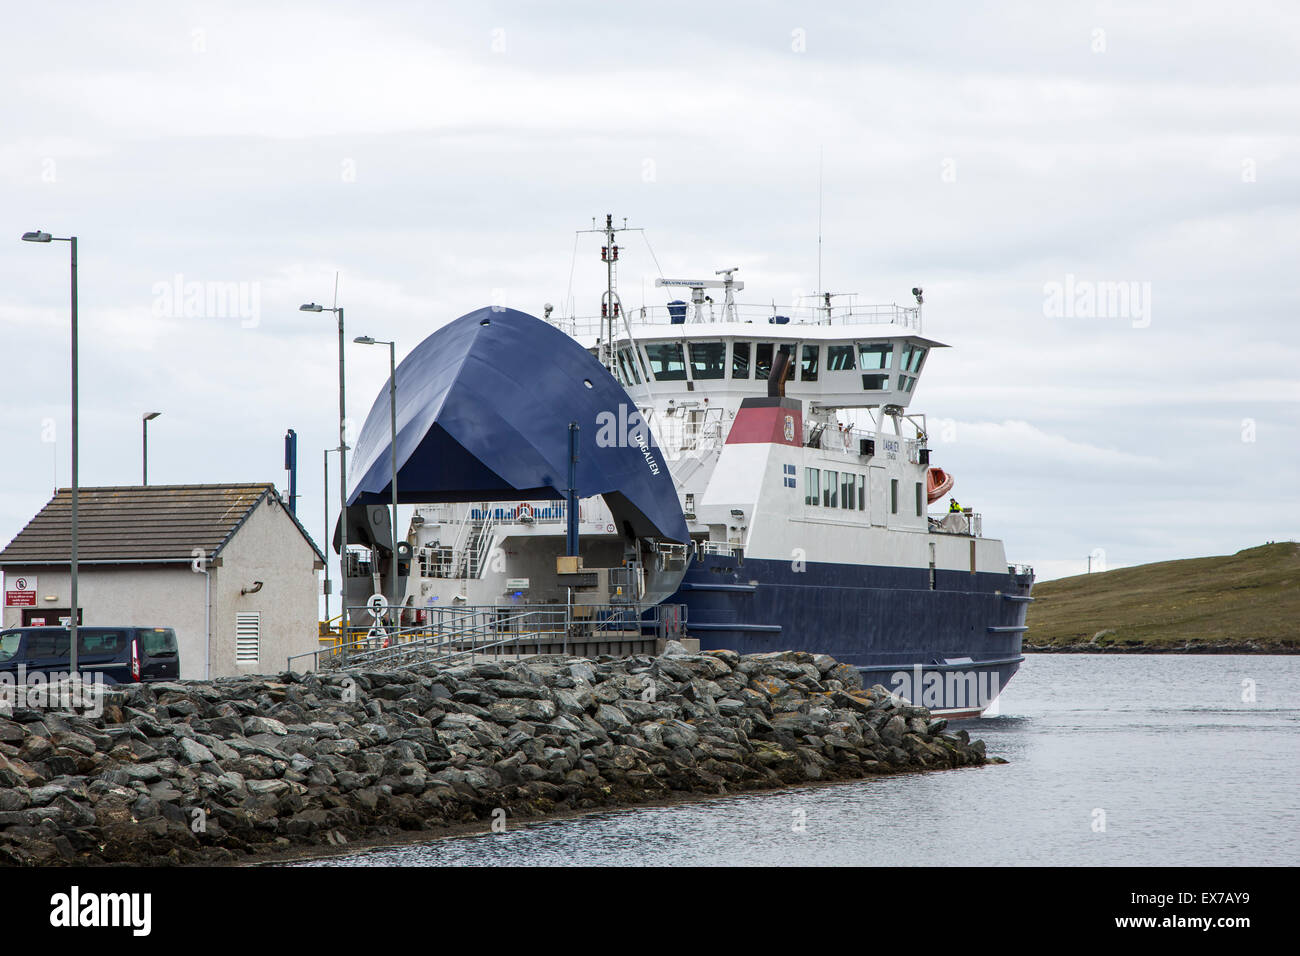 The 'Dagalein' inter-island ferry at Toft, North Mainland, running between Yell and Mainland, Shetlands Stock Photo